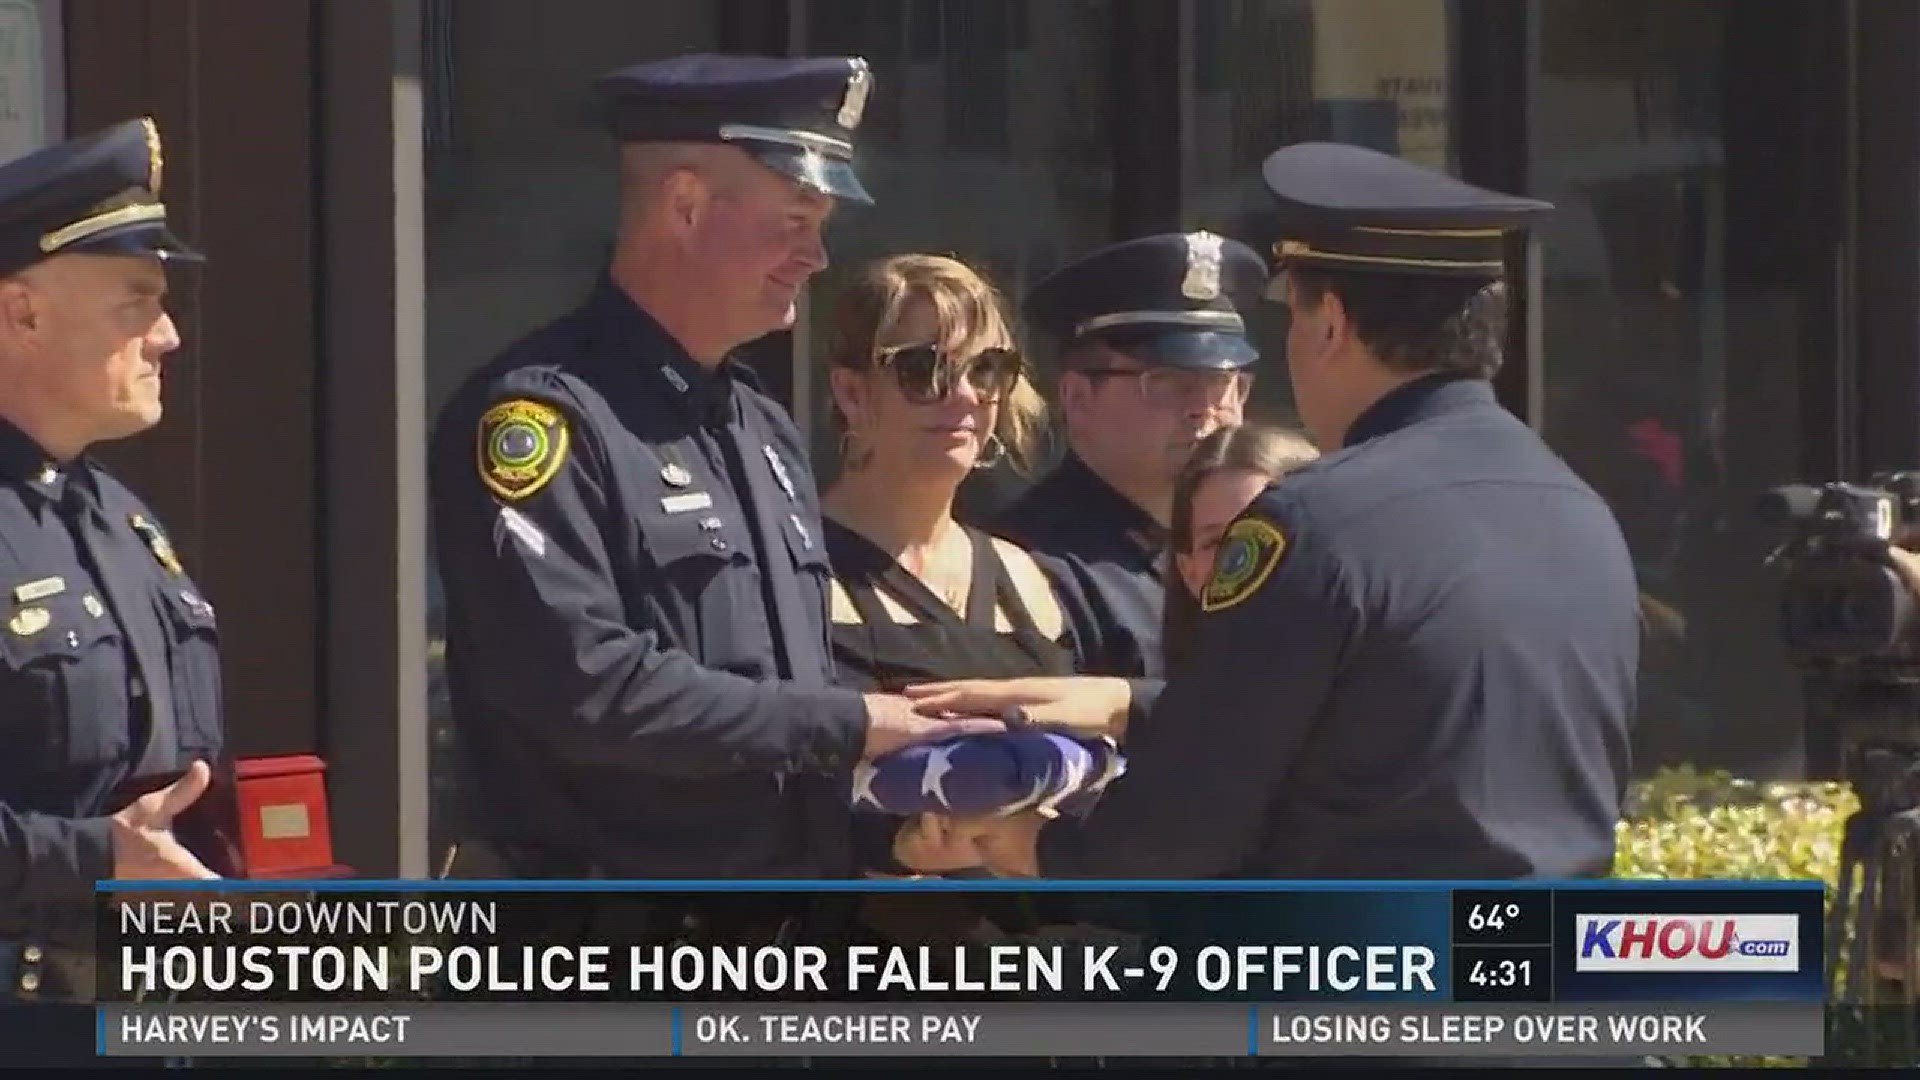 A touching ceremony was held Wednesday to honor a fallen Houston K-9 officer. K-9 Rony was put down last month after suffering an injury in the line of duty. He shattered his leg while chasing a suspect.